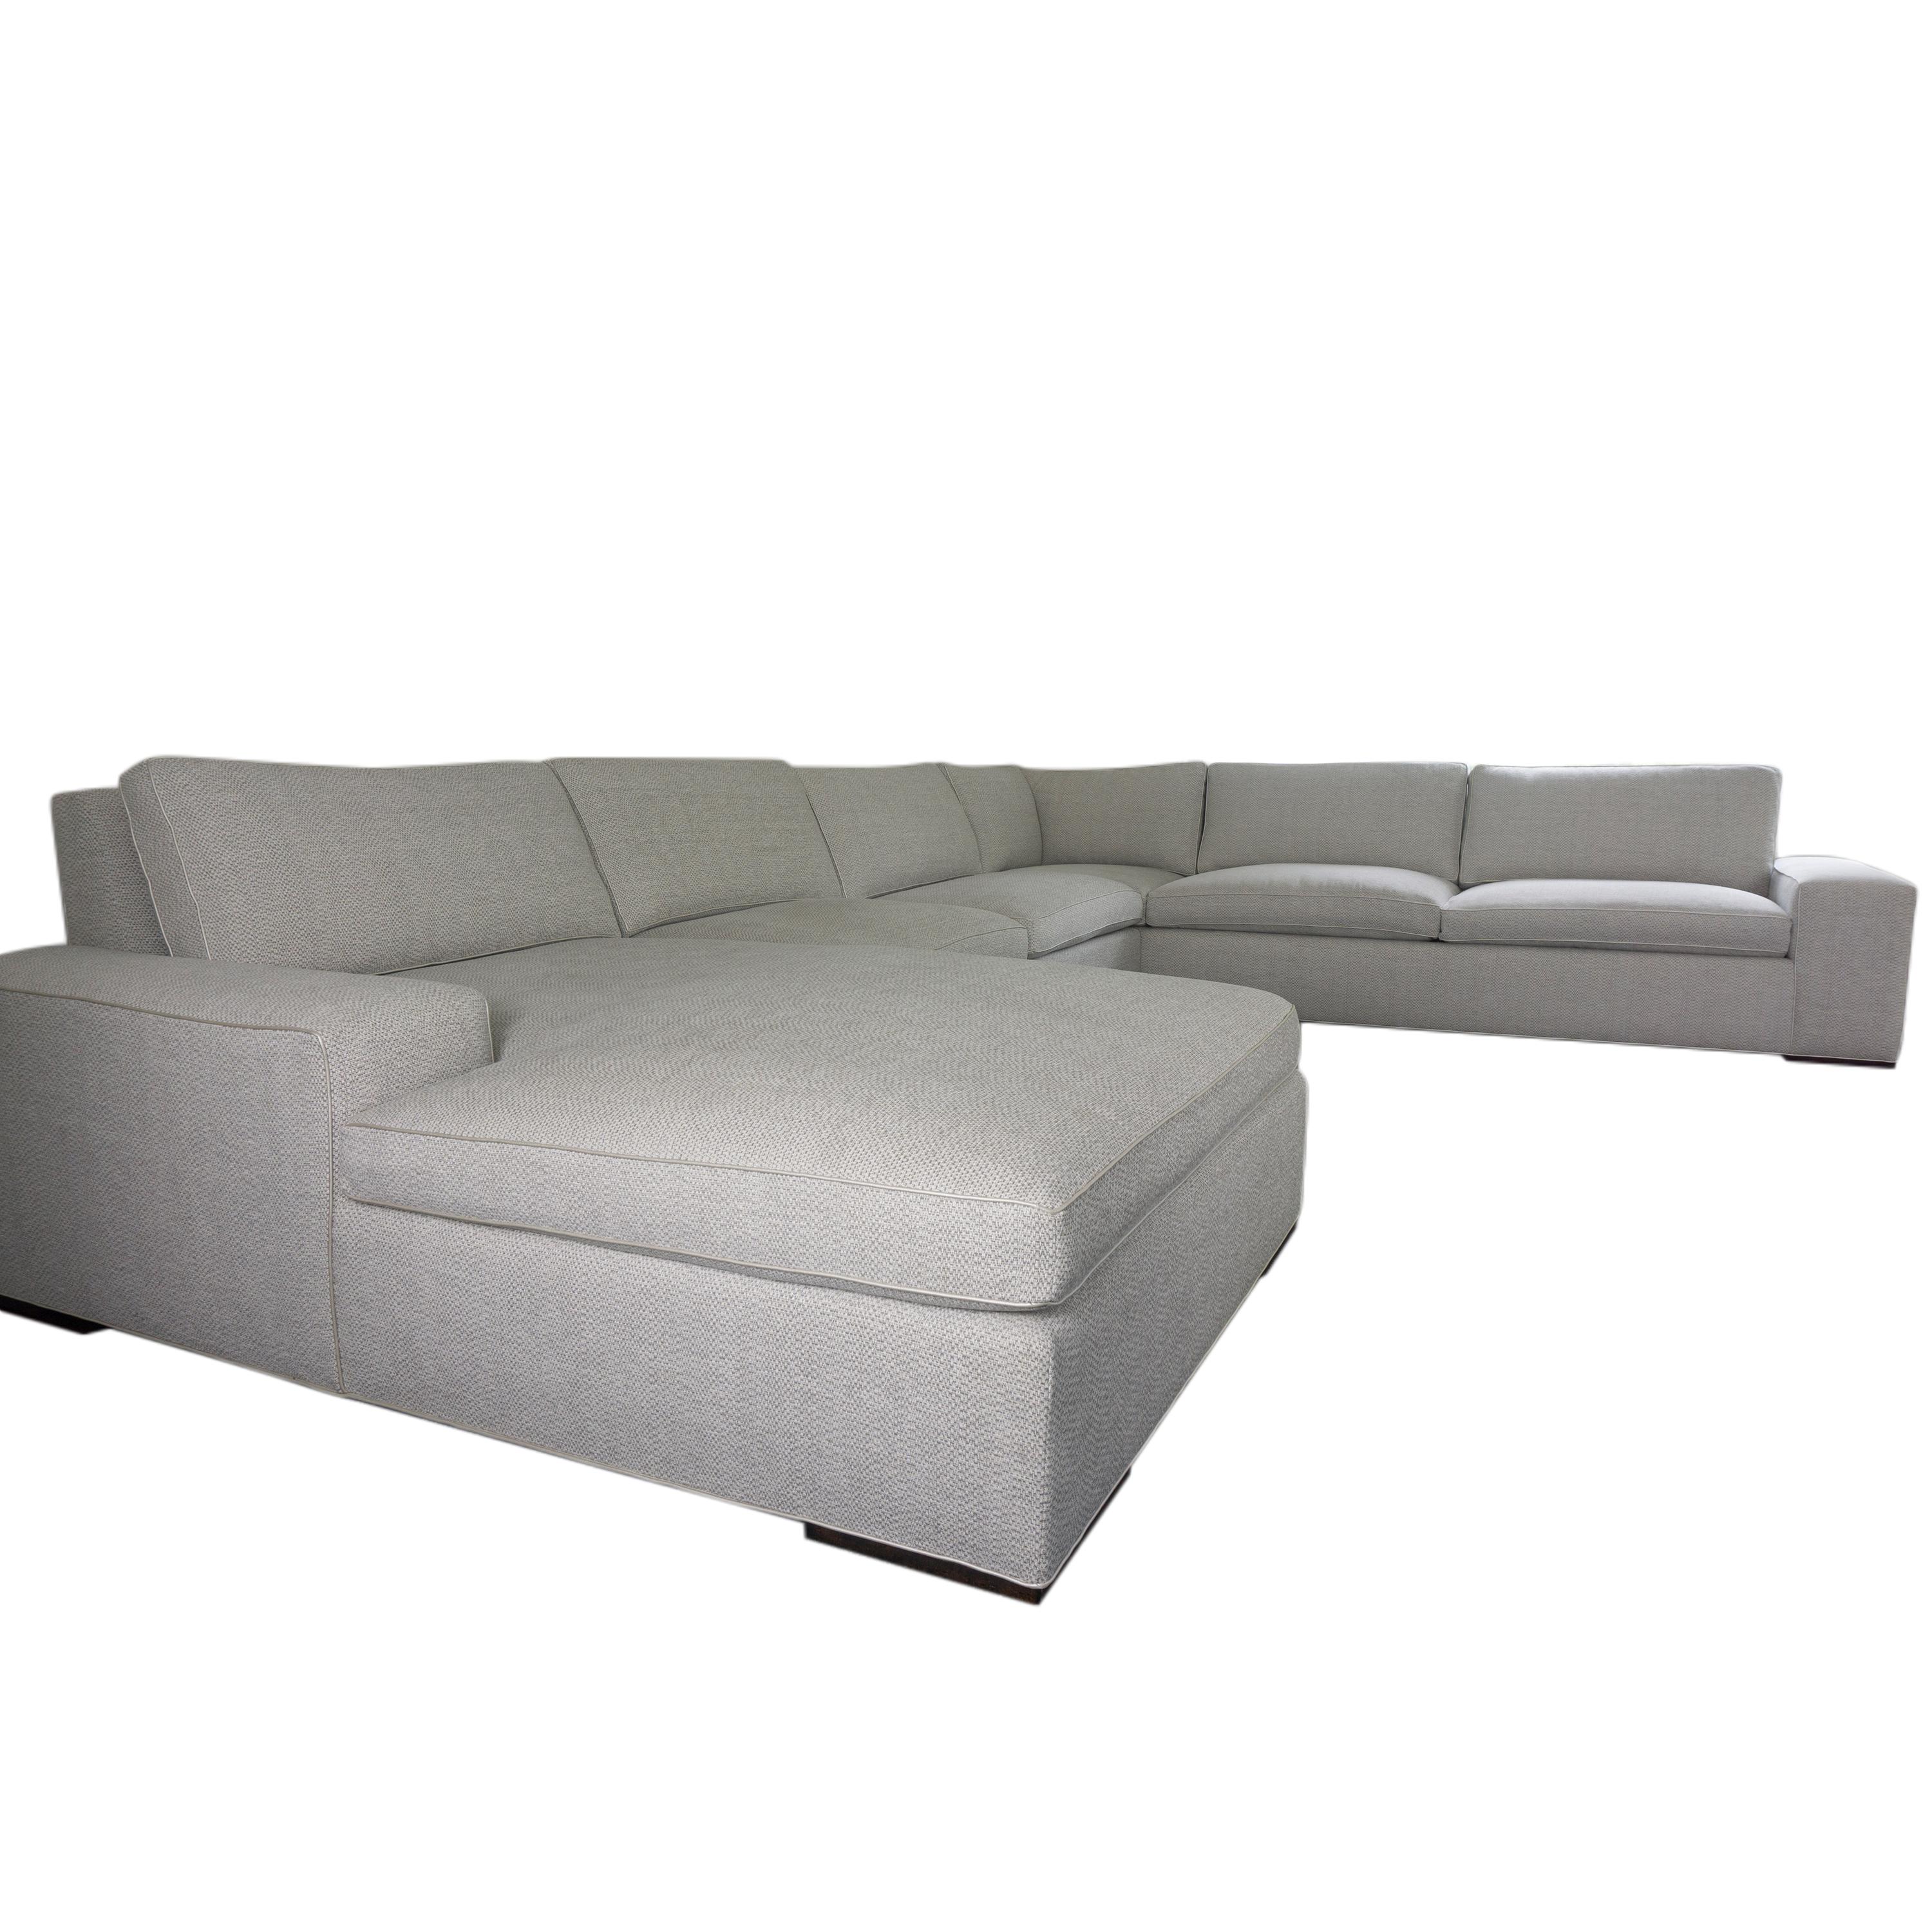 square couch sectional